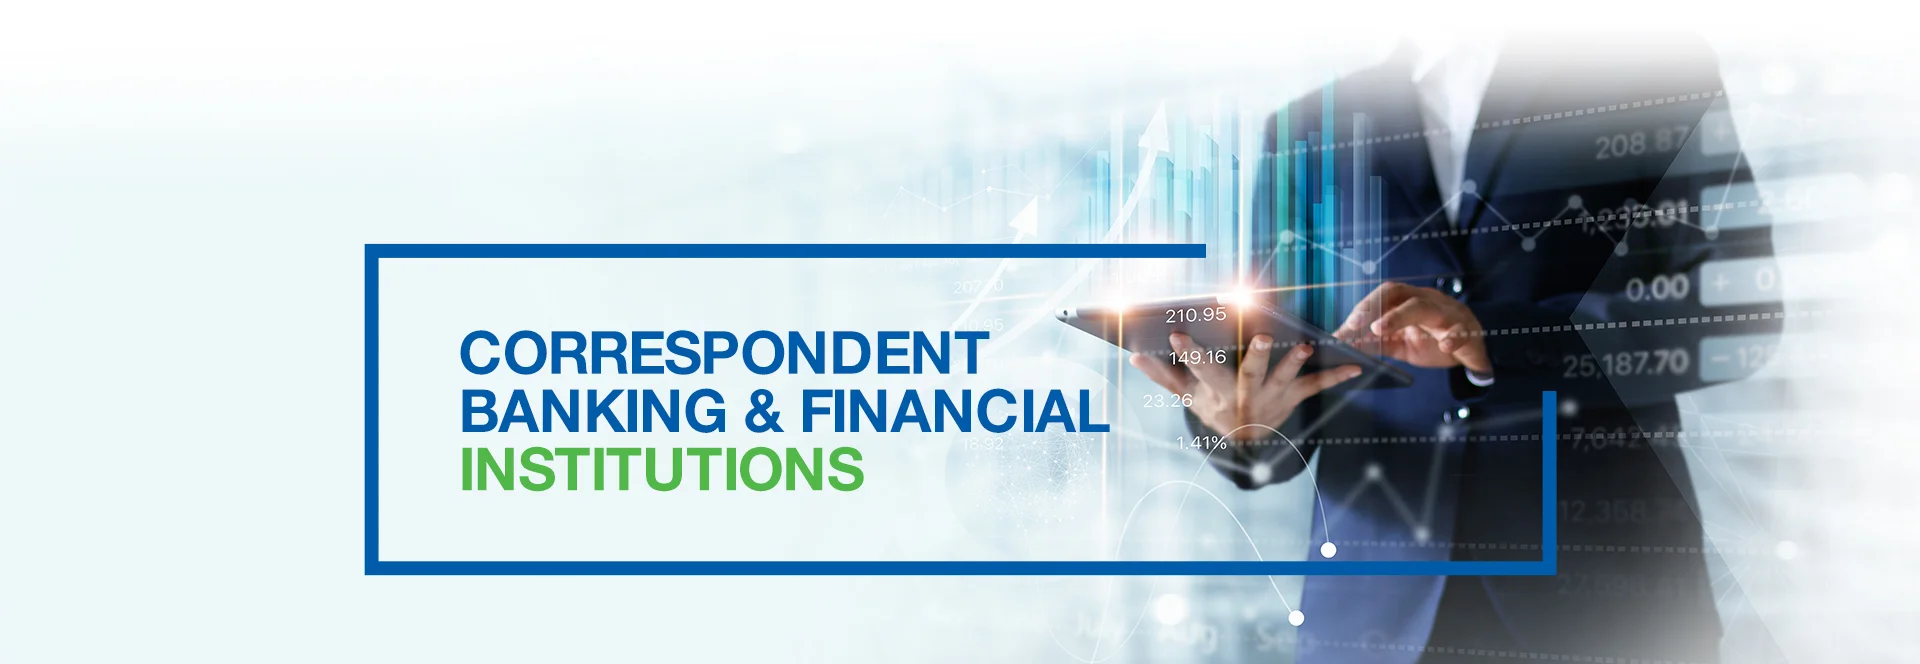 Correspondent Banking & Financial Institutions